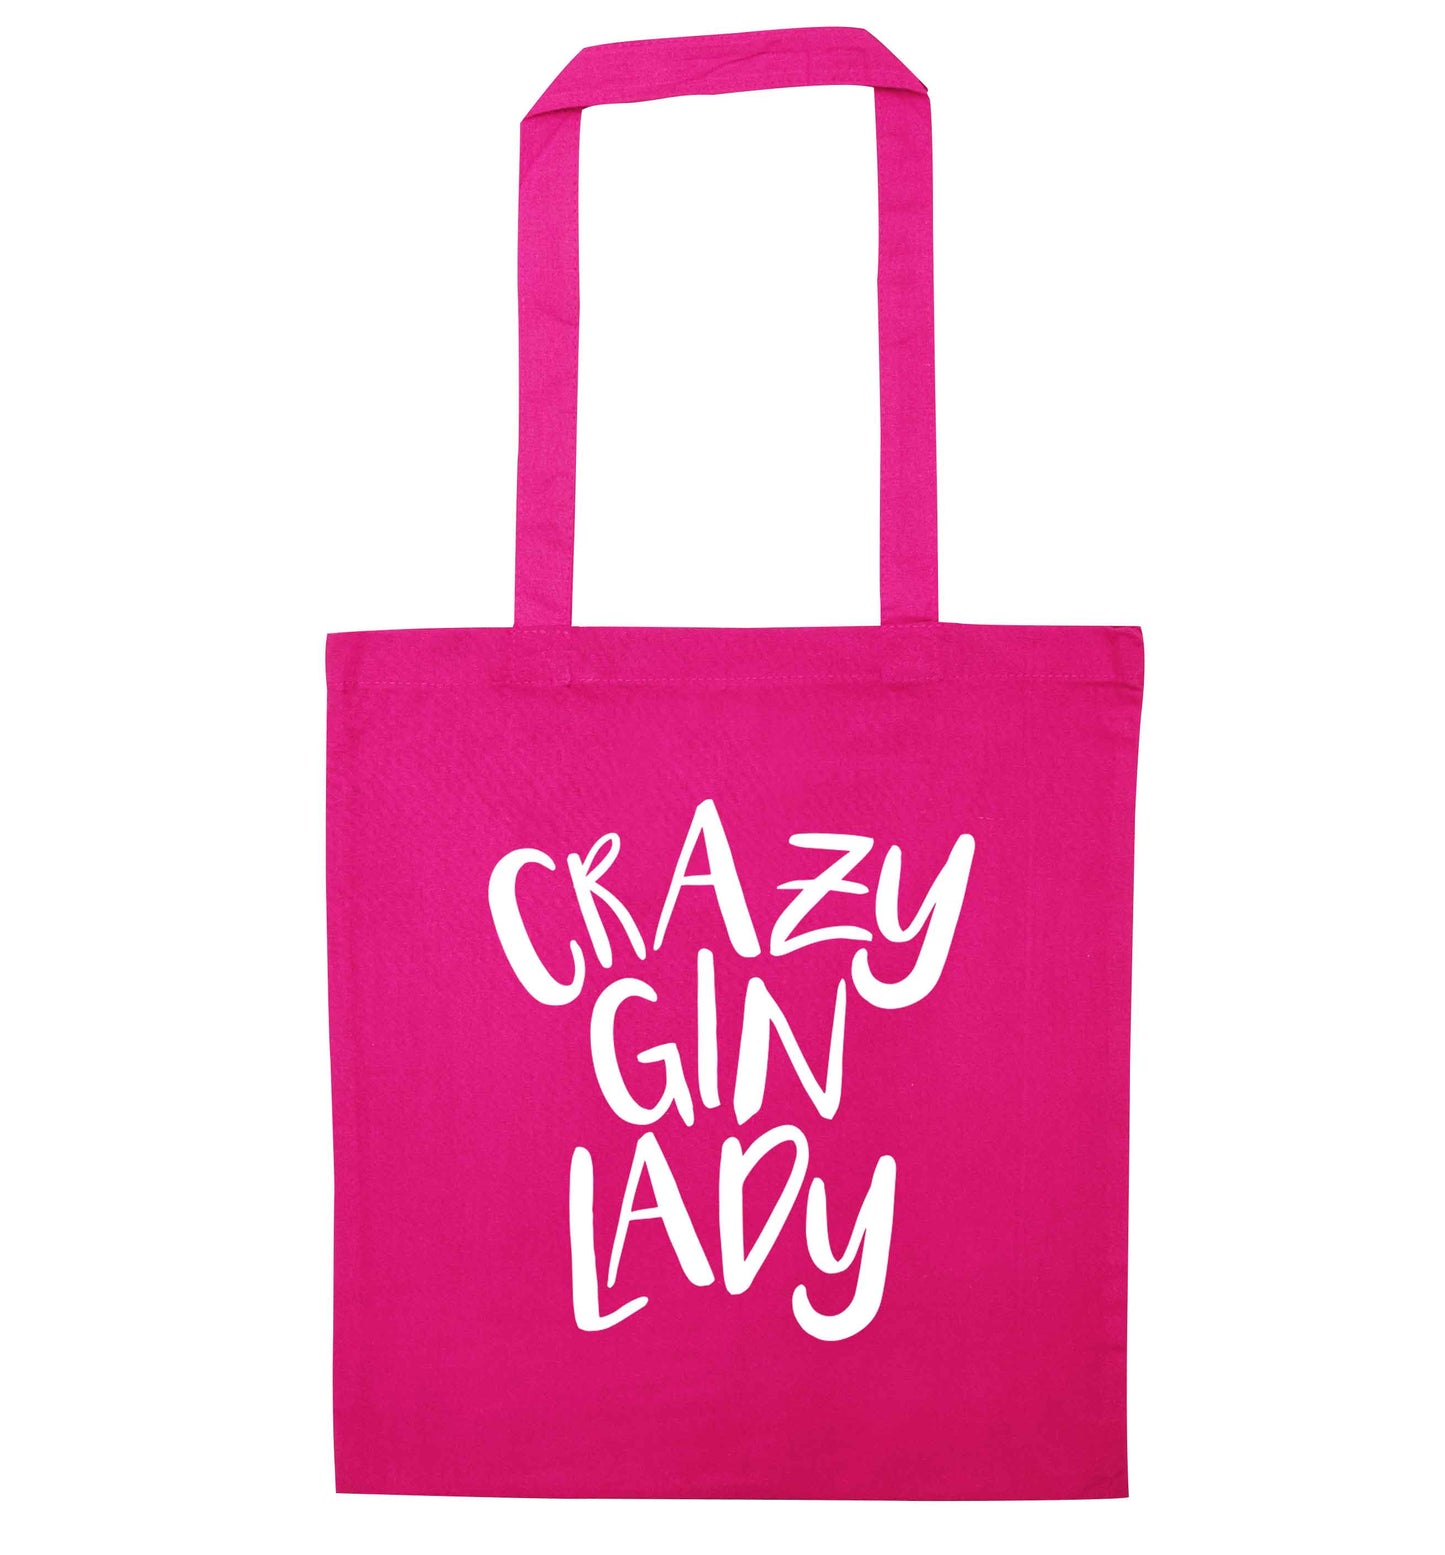 Crazy gin lady pink tote bag